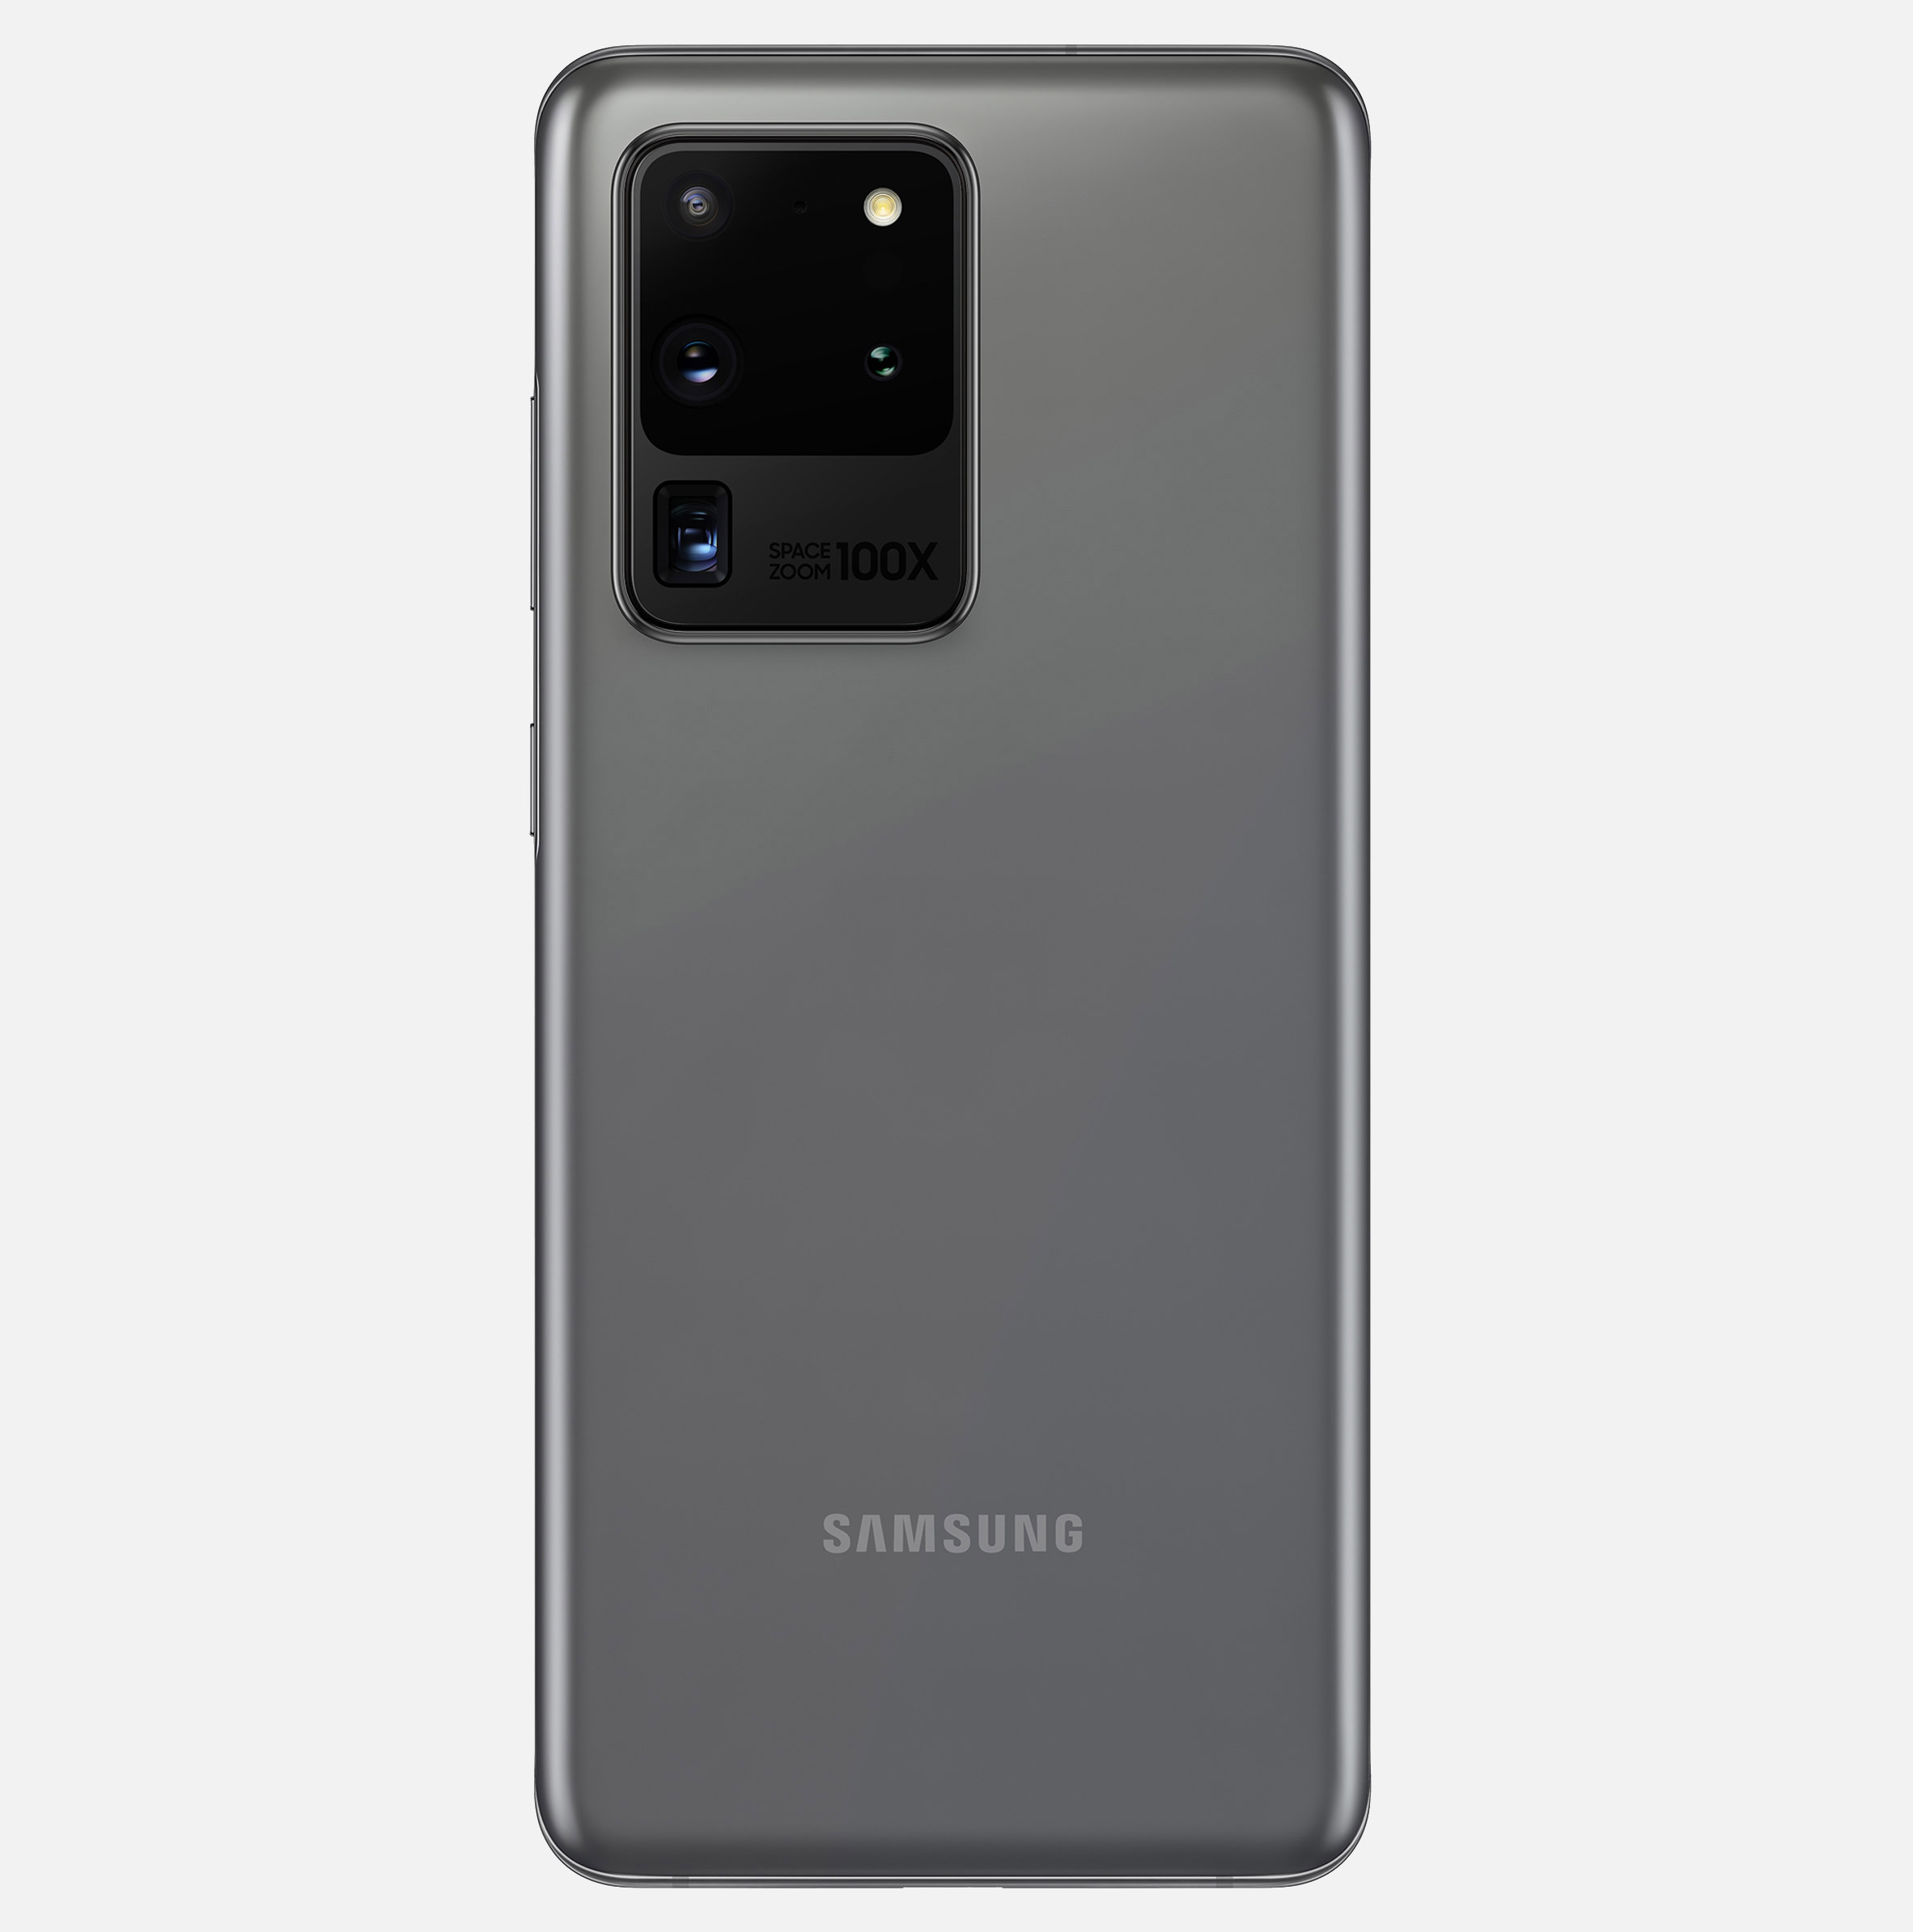 Samsung launches Galaxy S20 smartphone with AI-powered camera